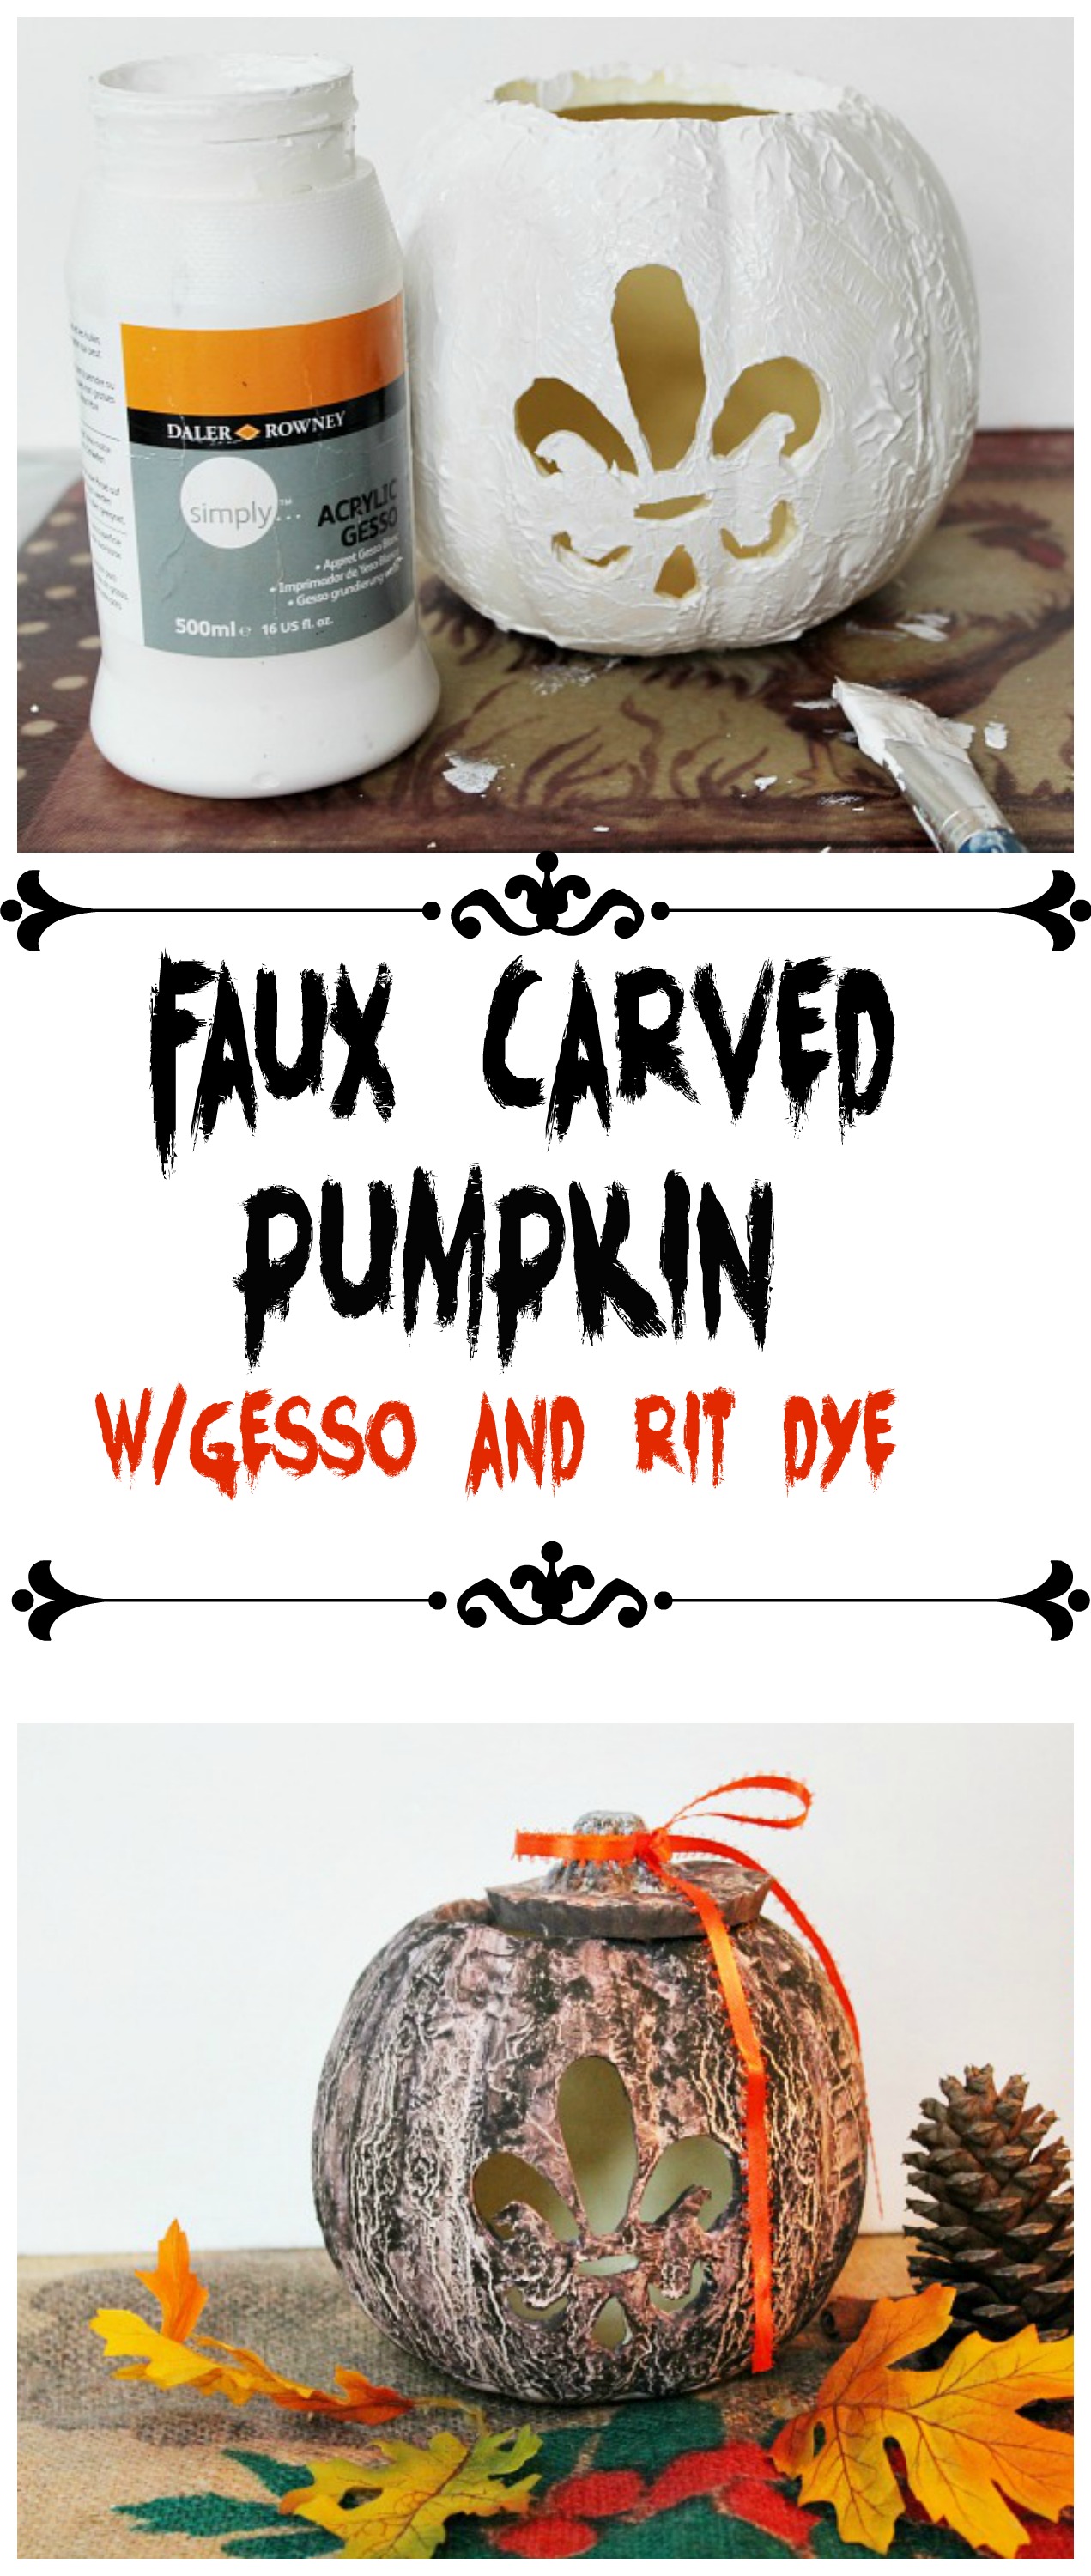 Faux carved pumpkin with gesso and rit dye